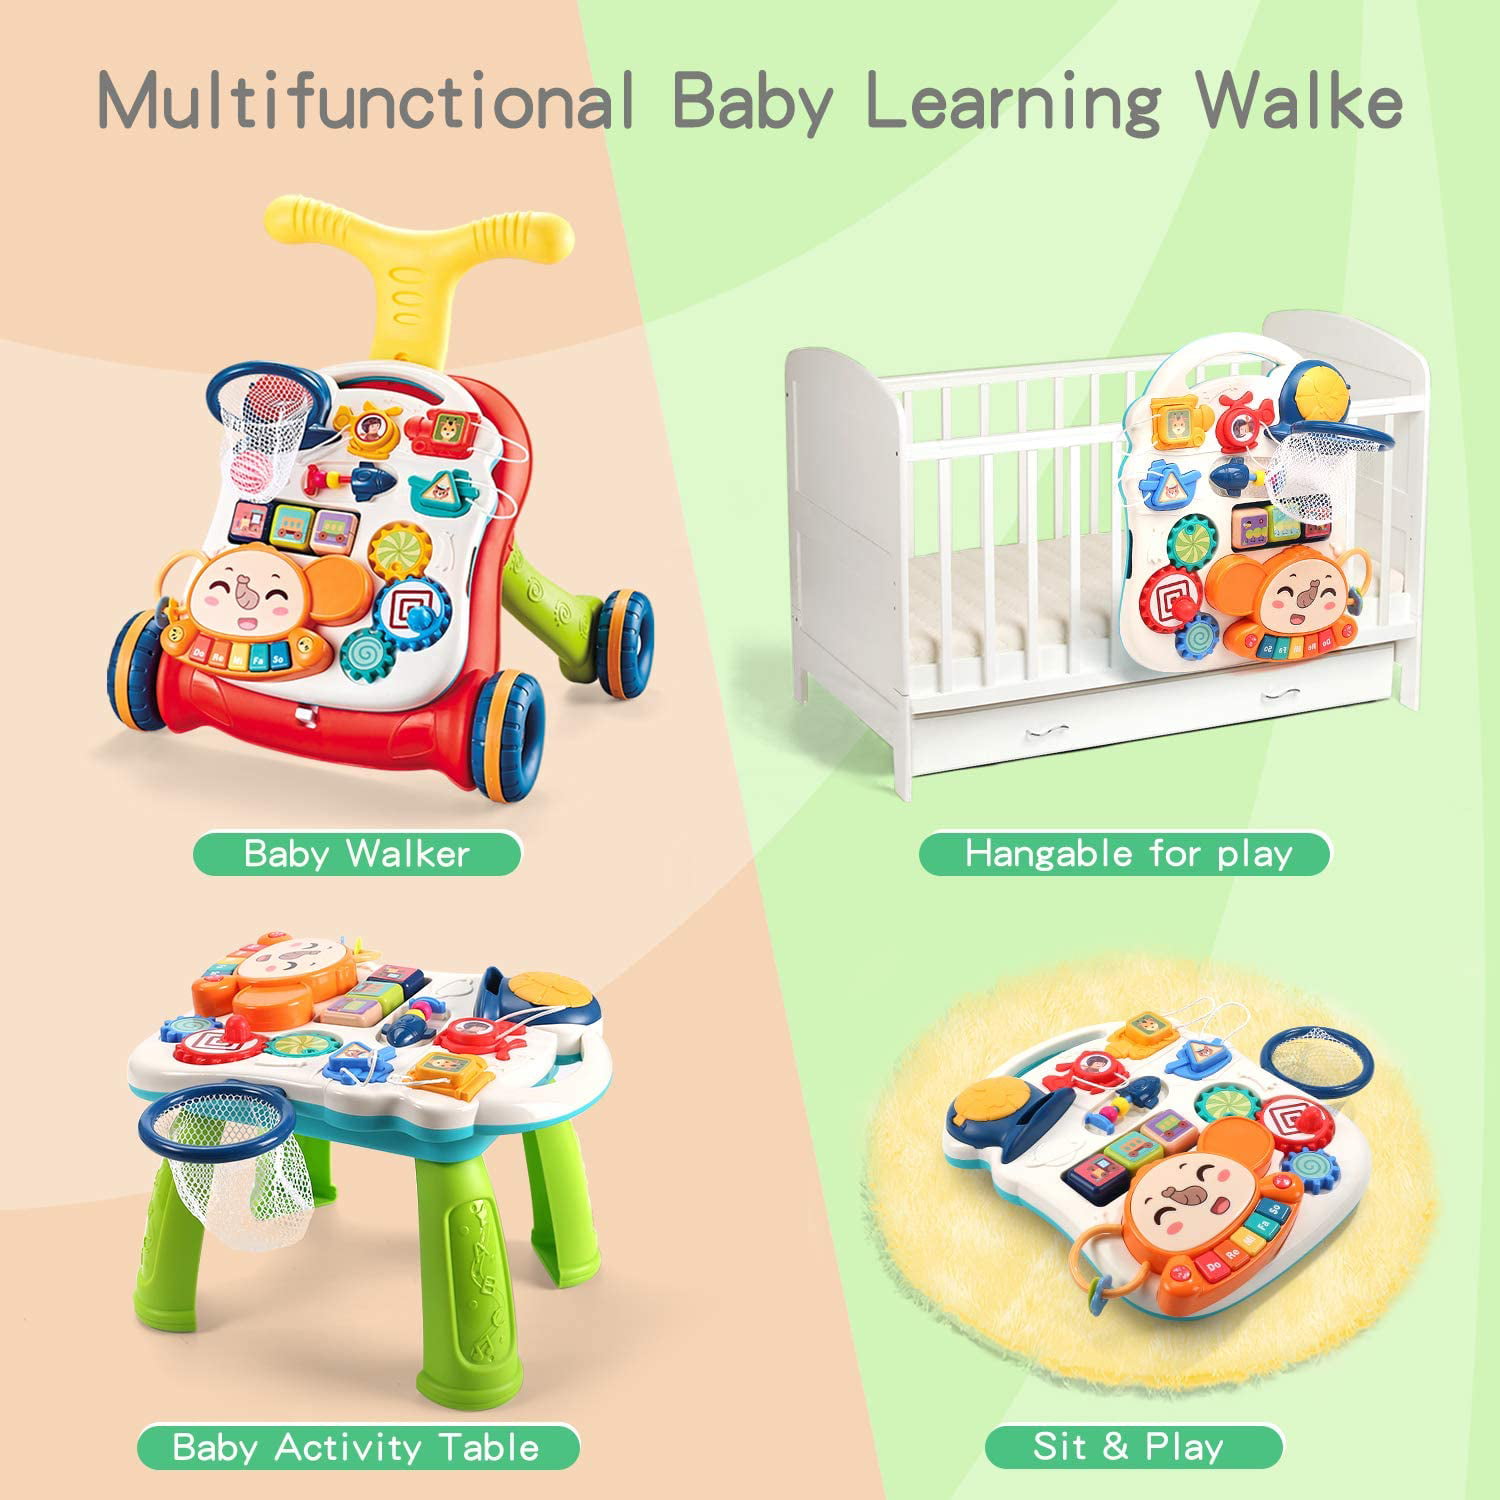 CUTE STONE Sit-to-Stand Learning Walker,3 in 1 Baby Walker,Kids Early Educational Activity Center,Multifunctional Removable Play Panel,Baby Music Learning Toy Gift for Infant,Boys,Girls 